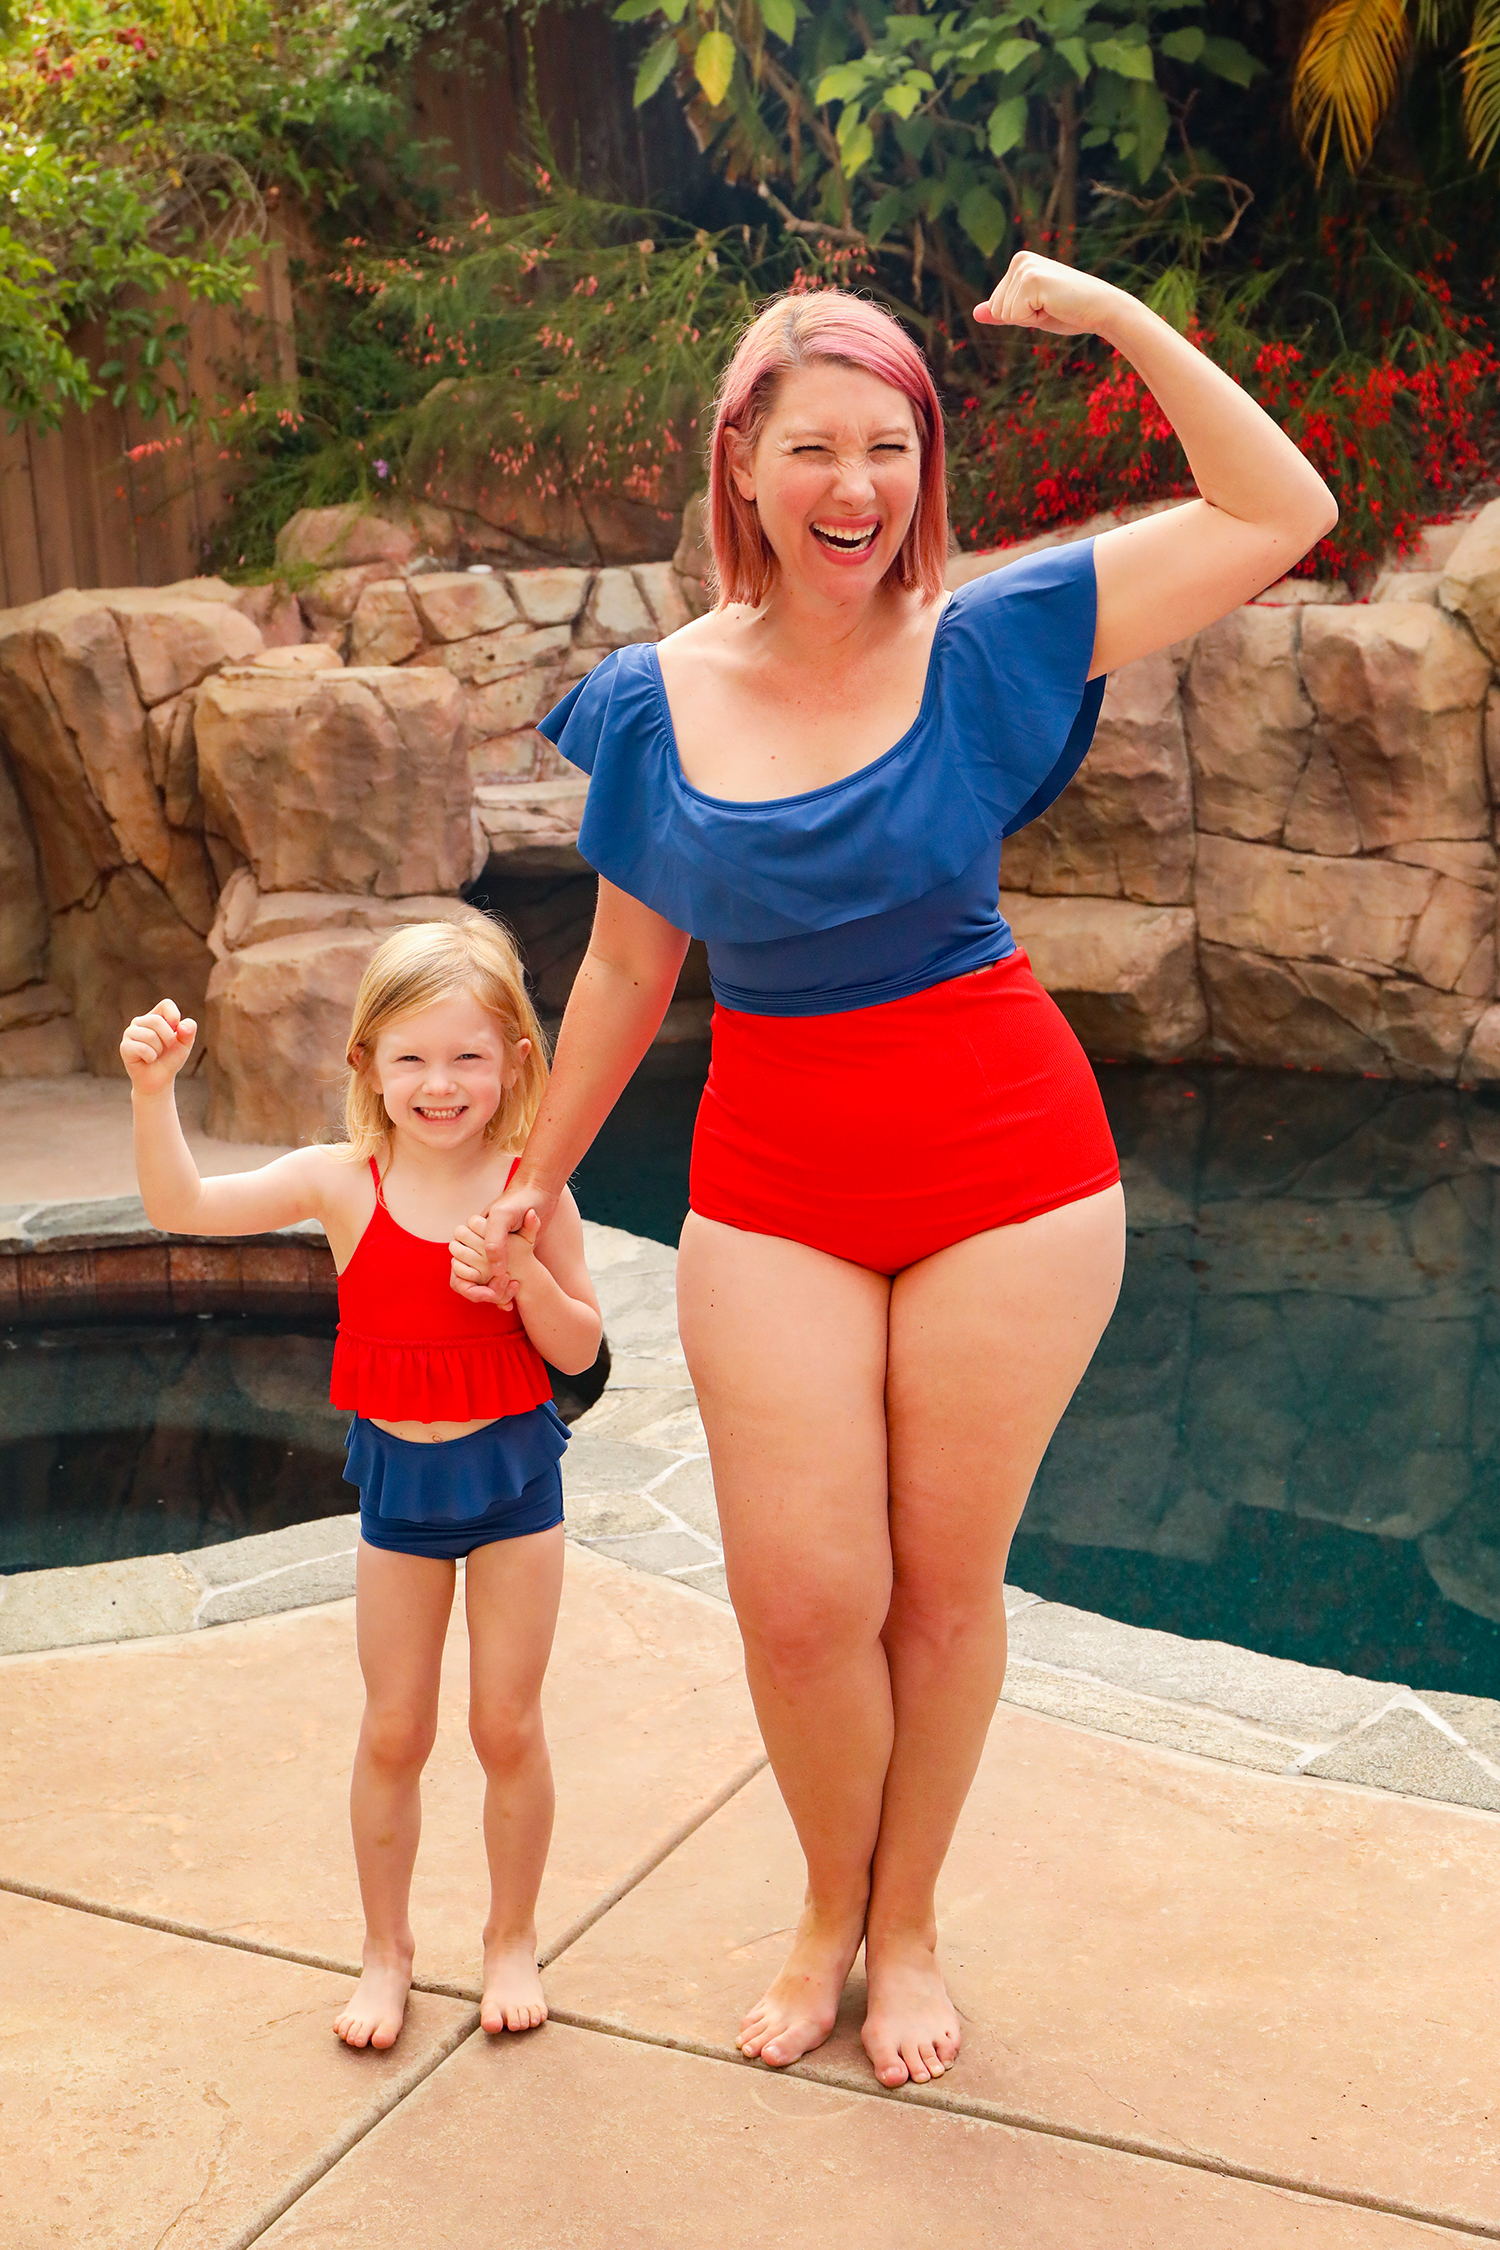 I'm OBSESSED with this two piece! It's one of the most flattering swimsuits for moms that I've found!